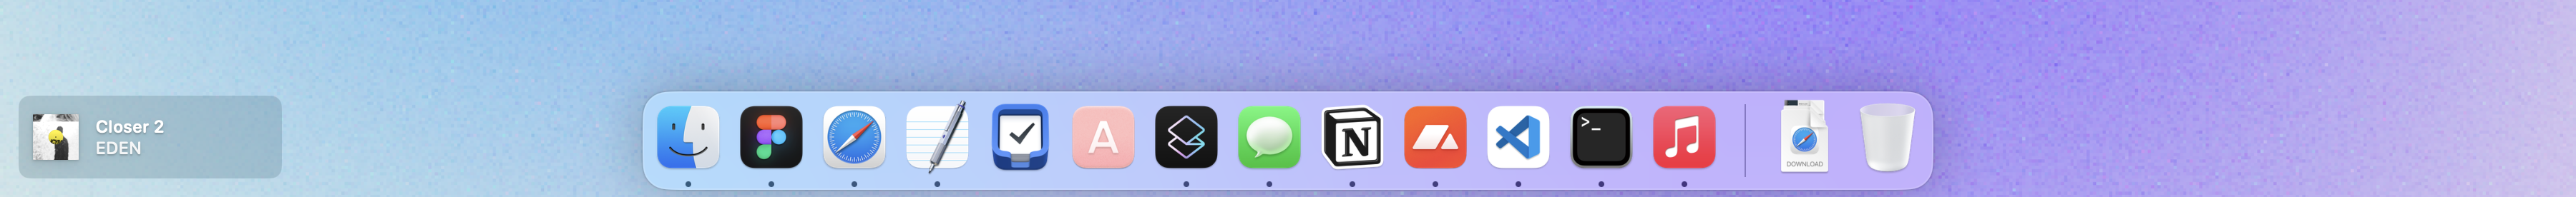 Image of a macOS dock